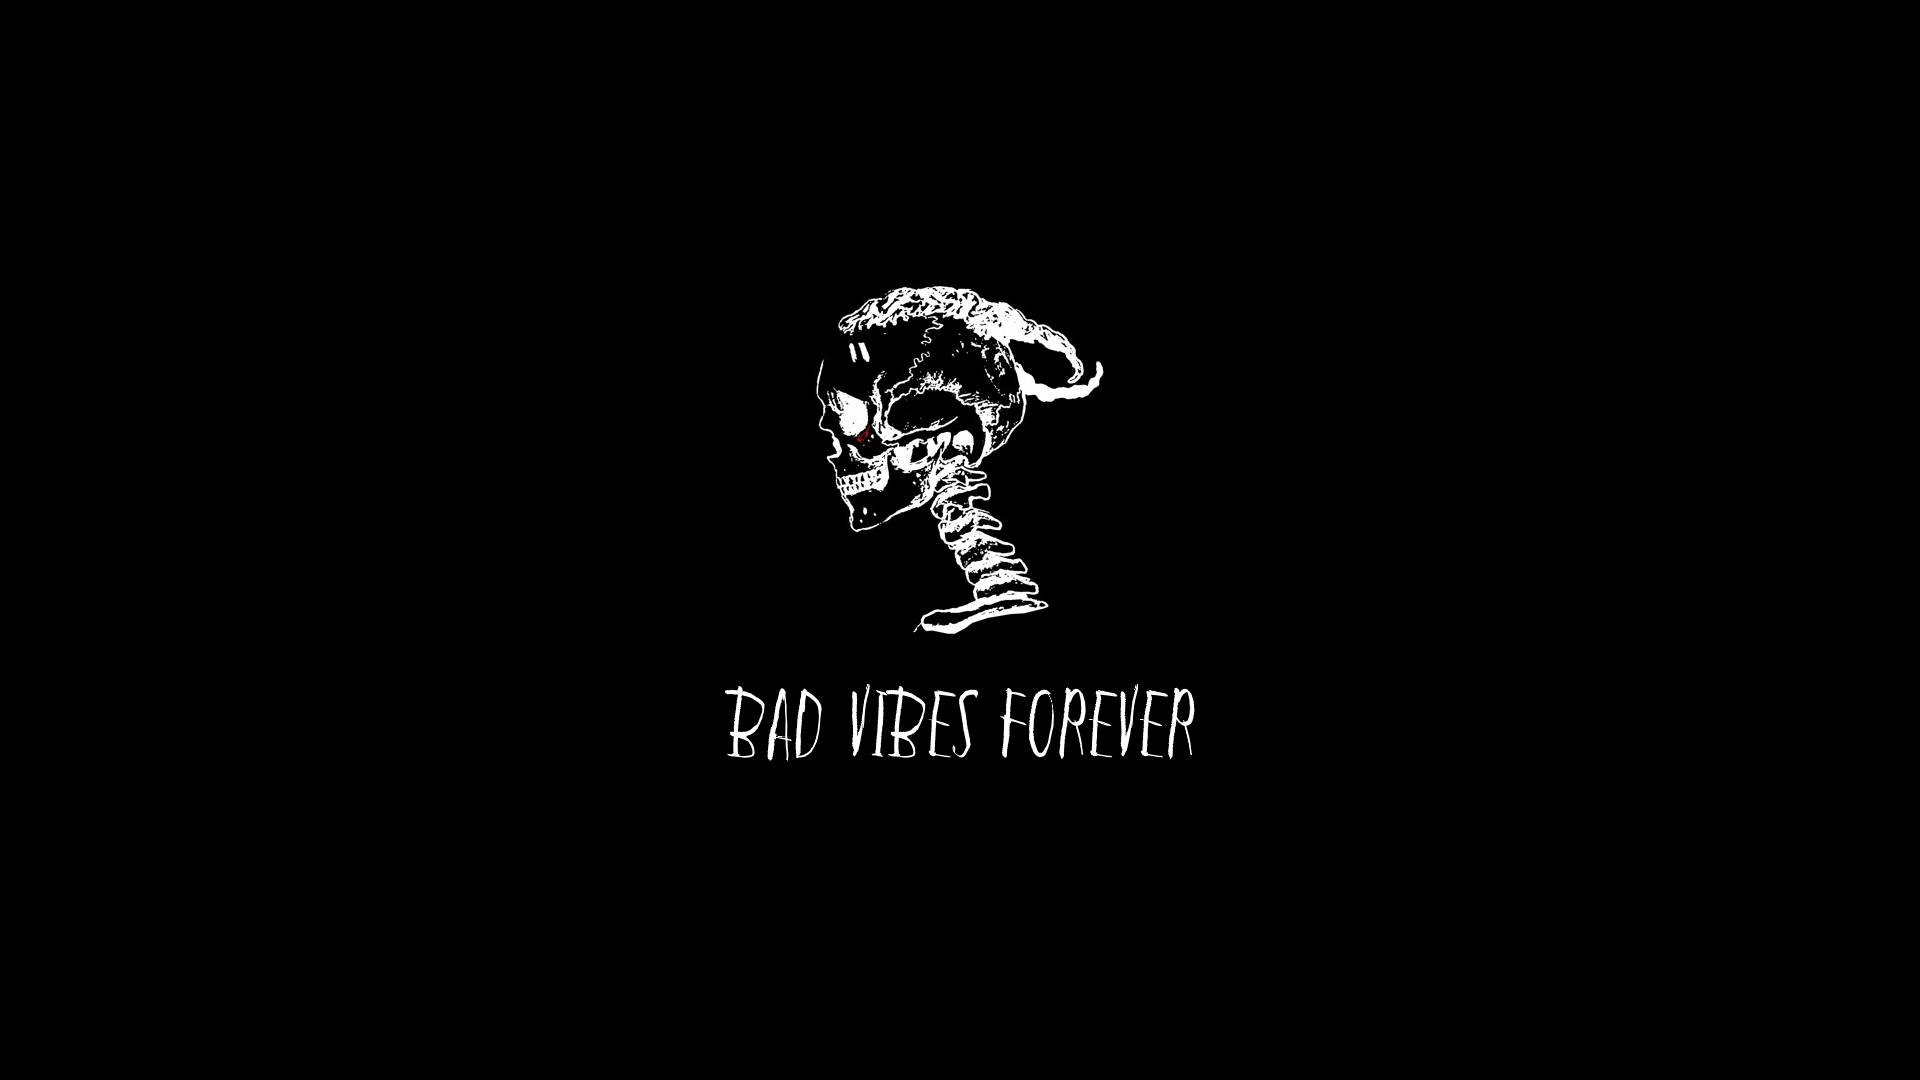 Bad Vibes Forever Xxxtentacion Aesthetic Background Wallpaper